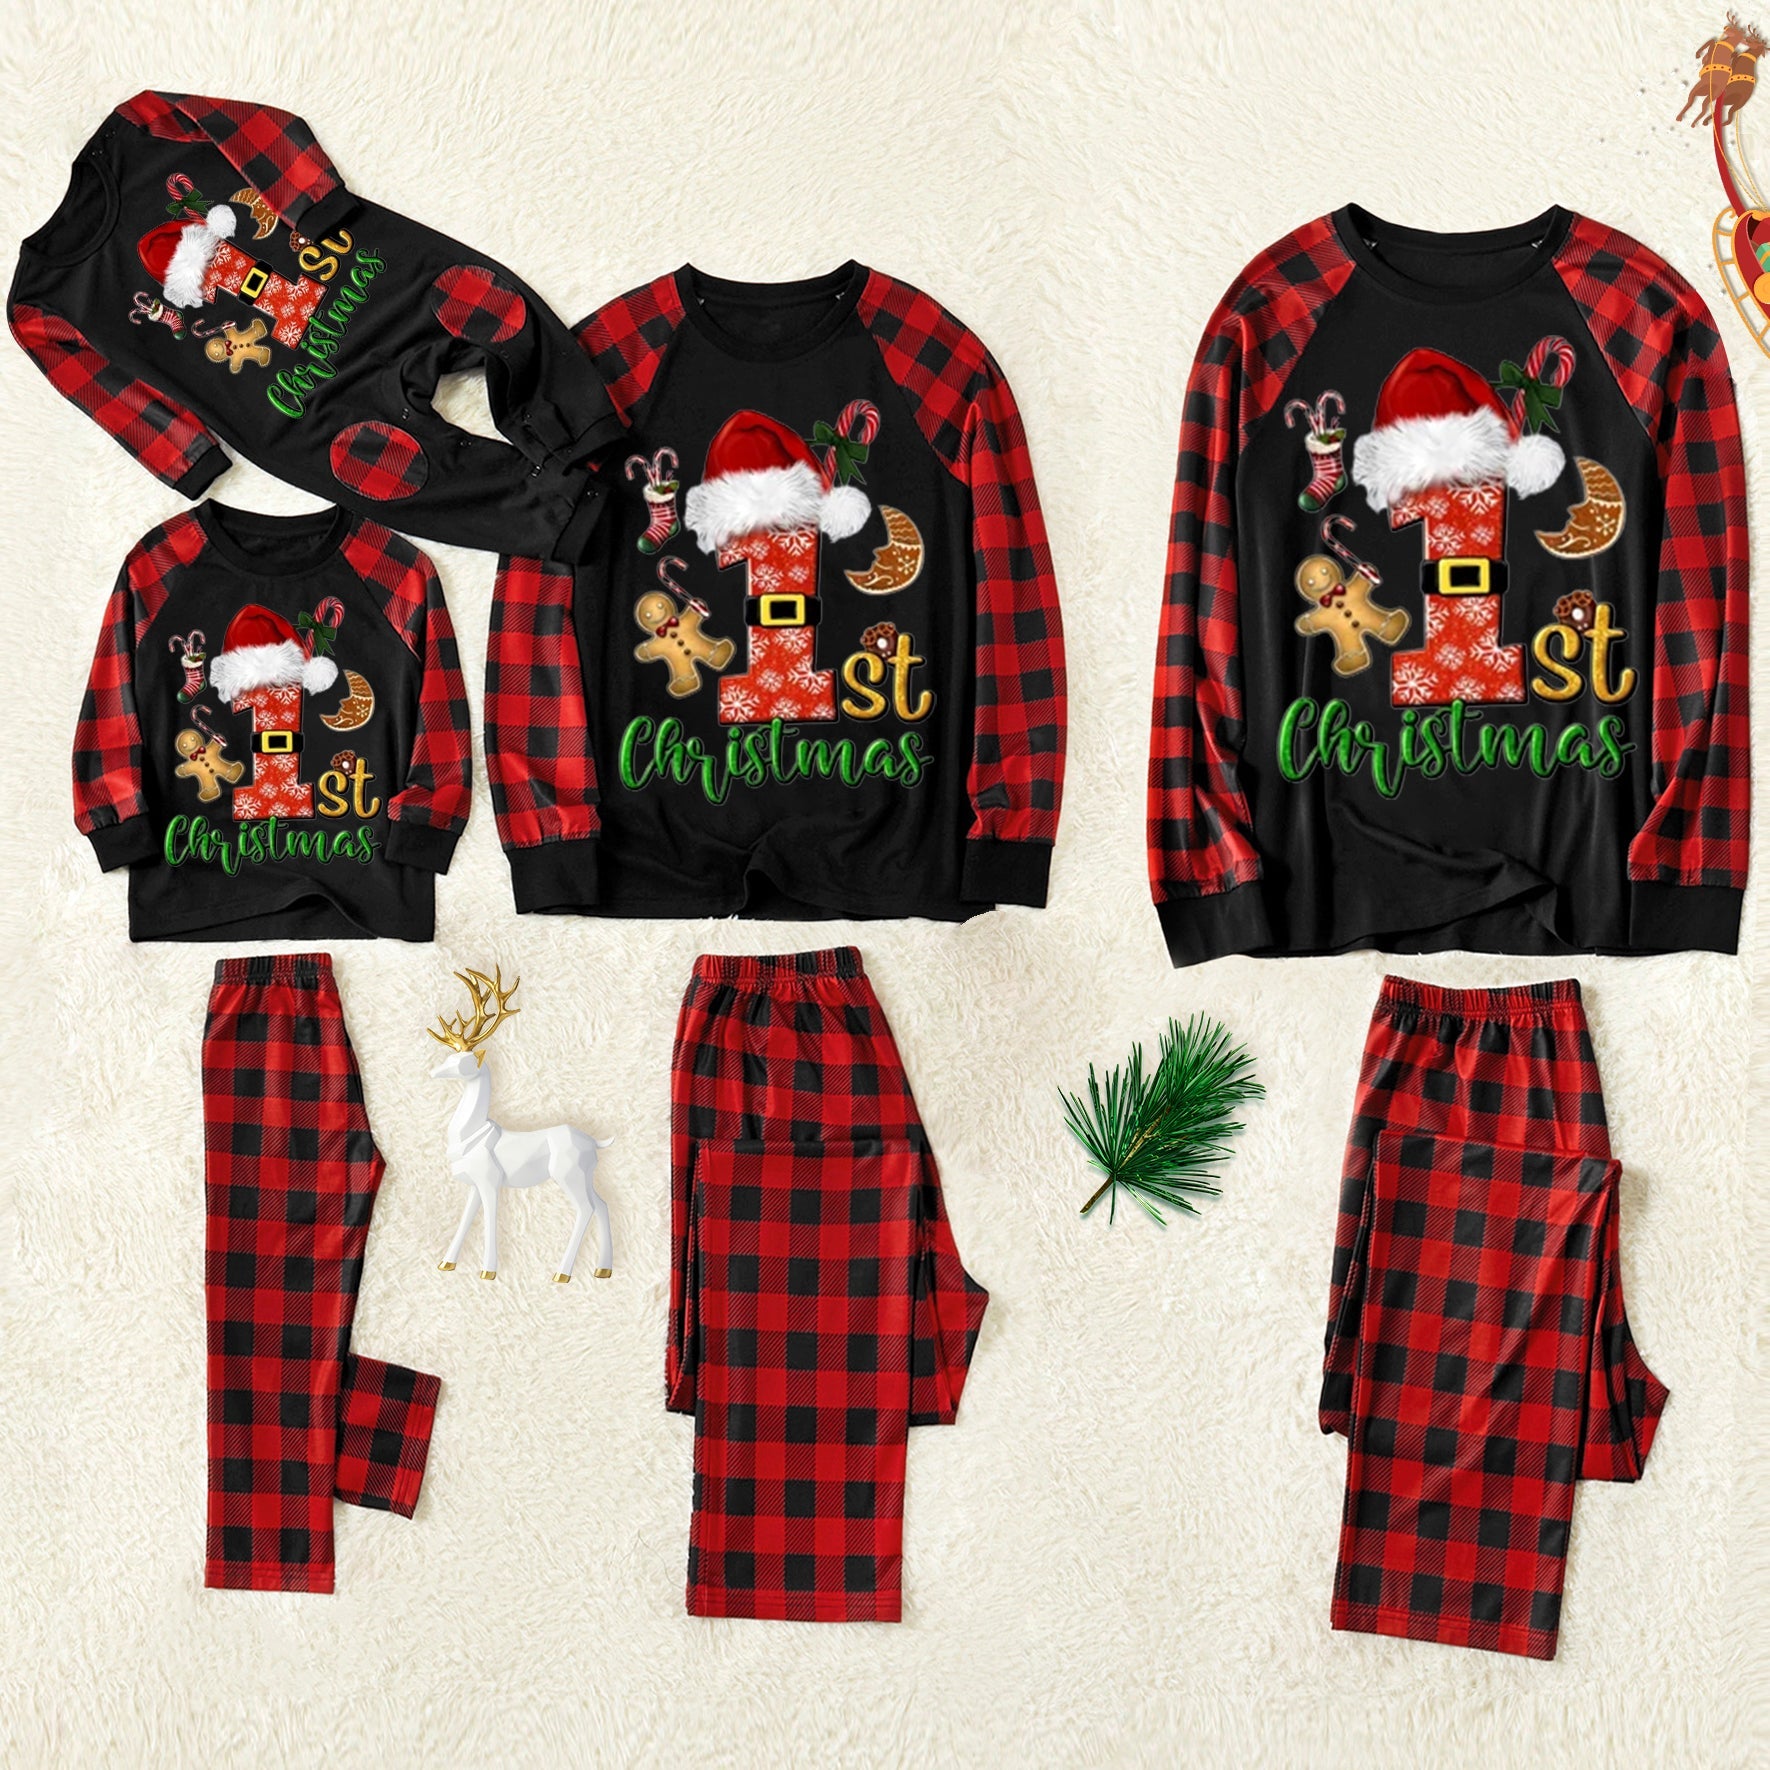 Christmas ‘1 St Christmas“ Letter Print Patterned Contrast Black top and Black & Red Plaid Pants Family Matching Pajamas Set